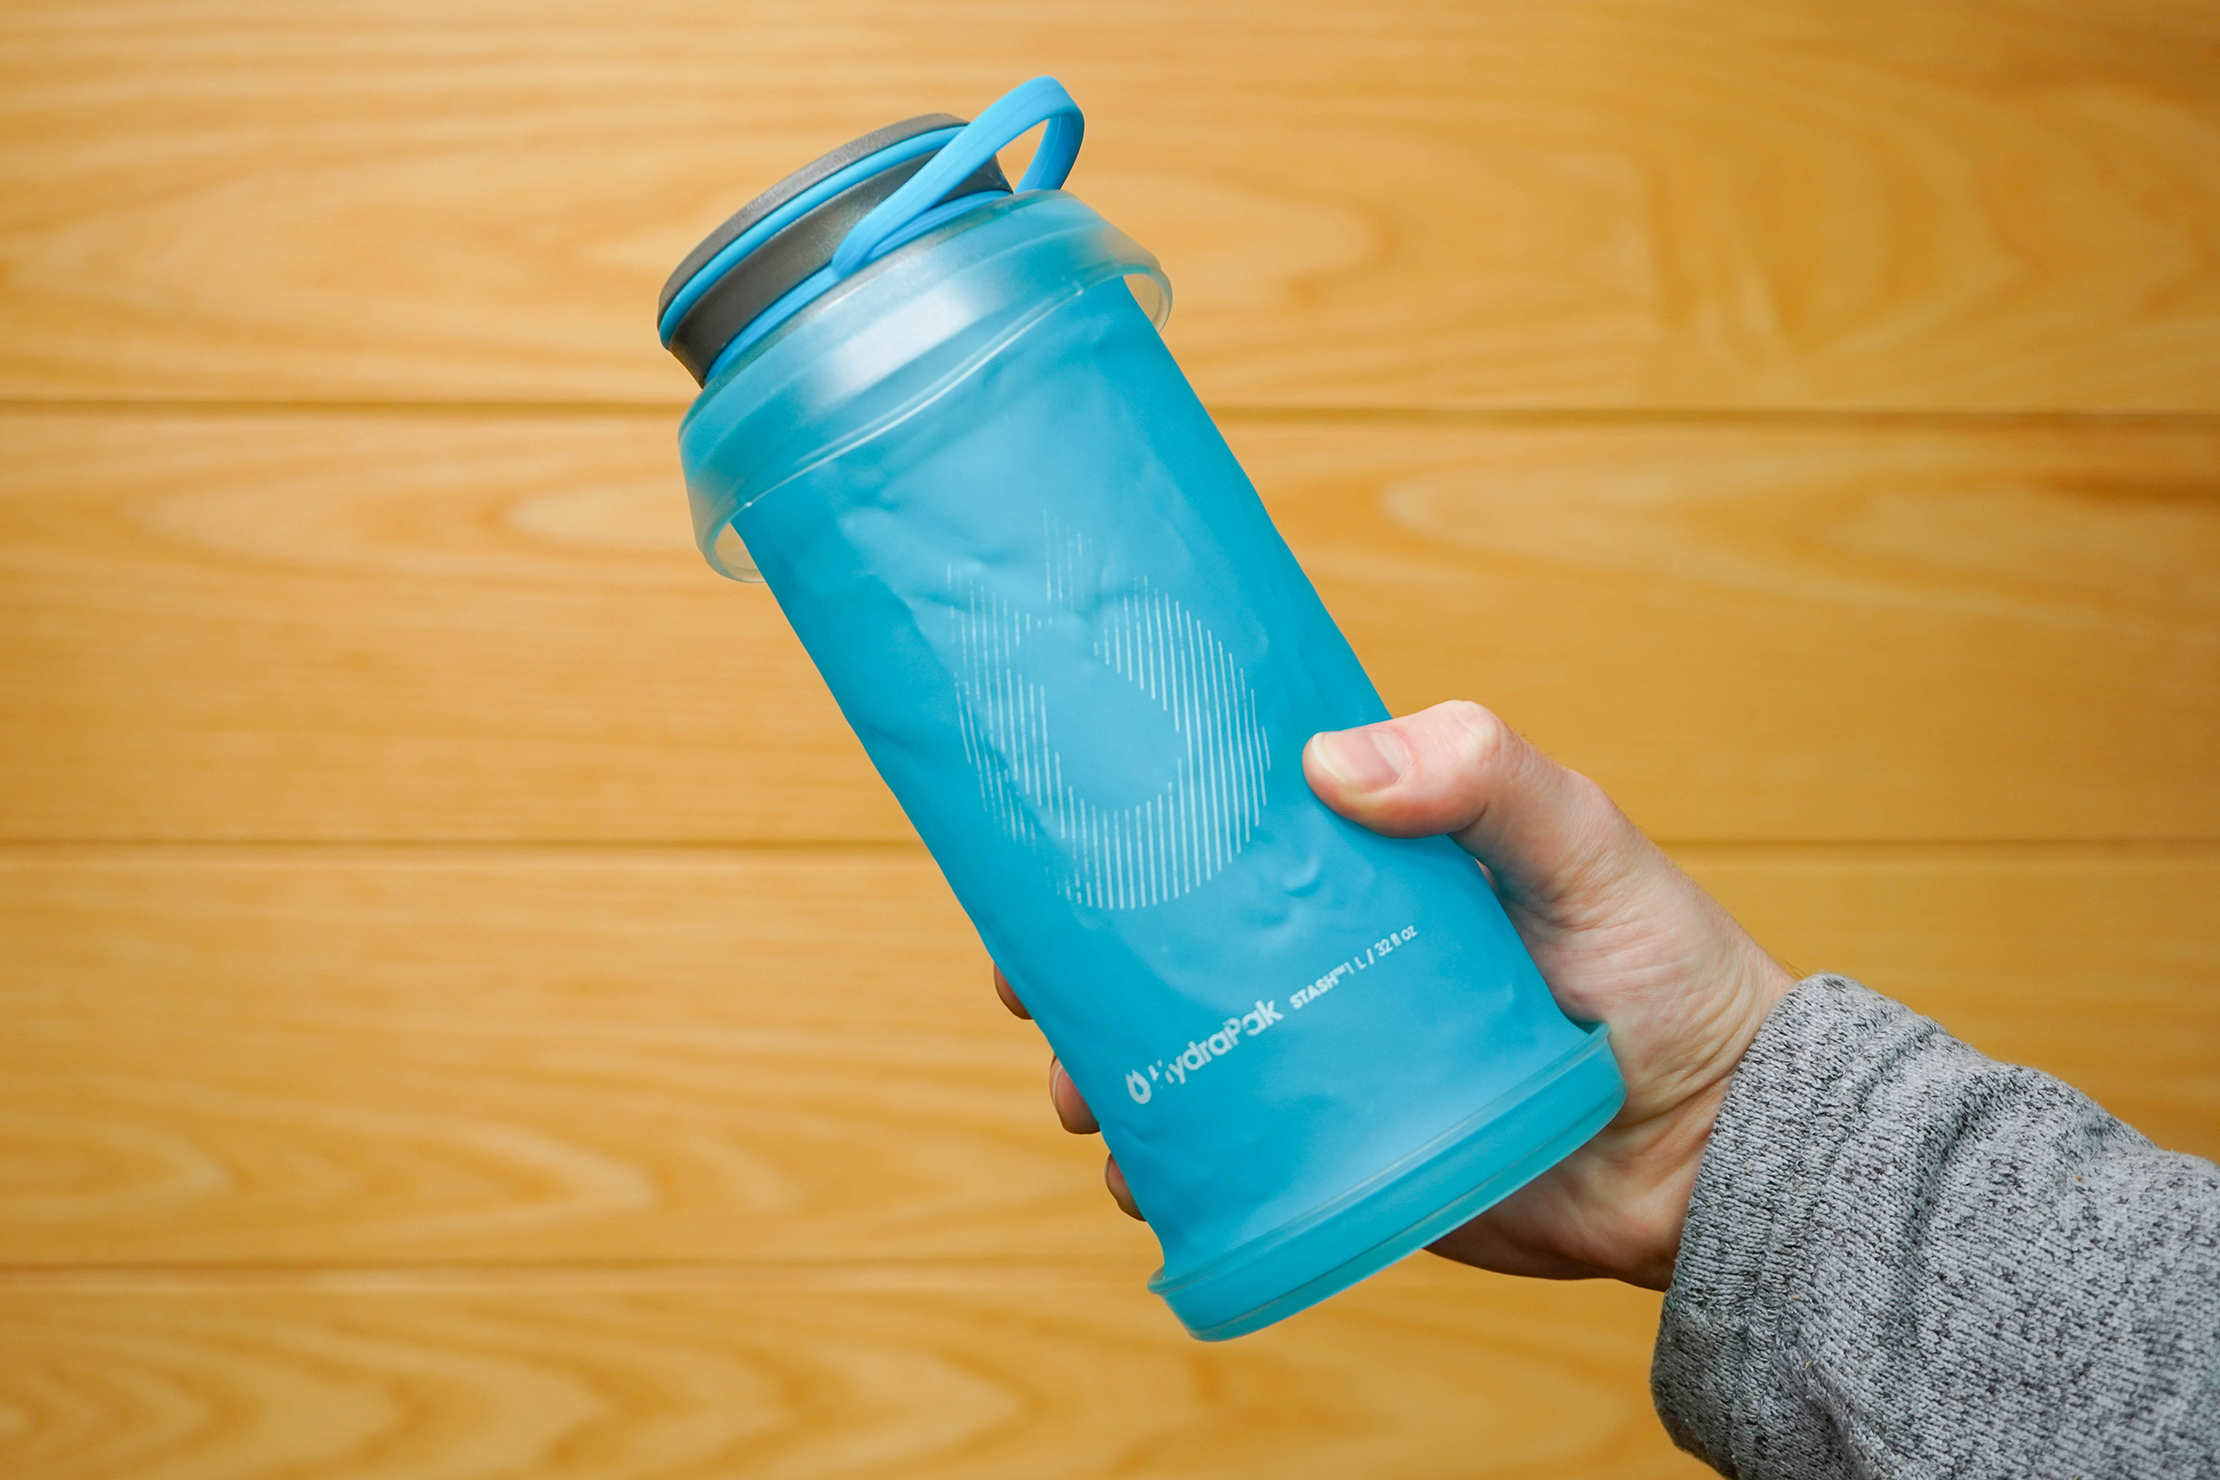 Hydrapak Stash 1L Collapsible Water Bottle Expanded In Hand